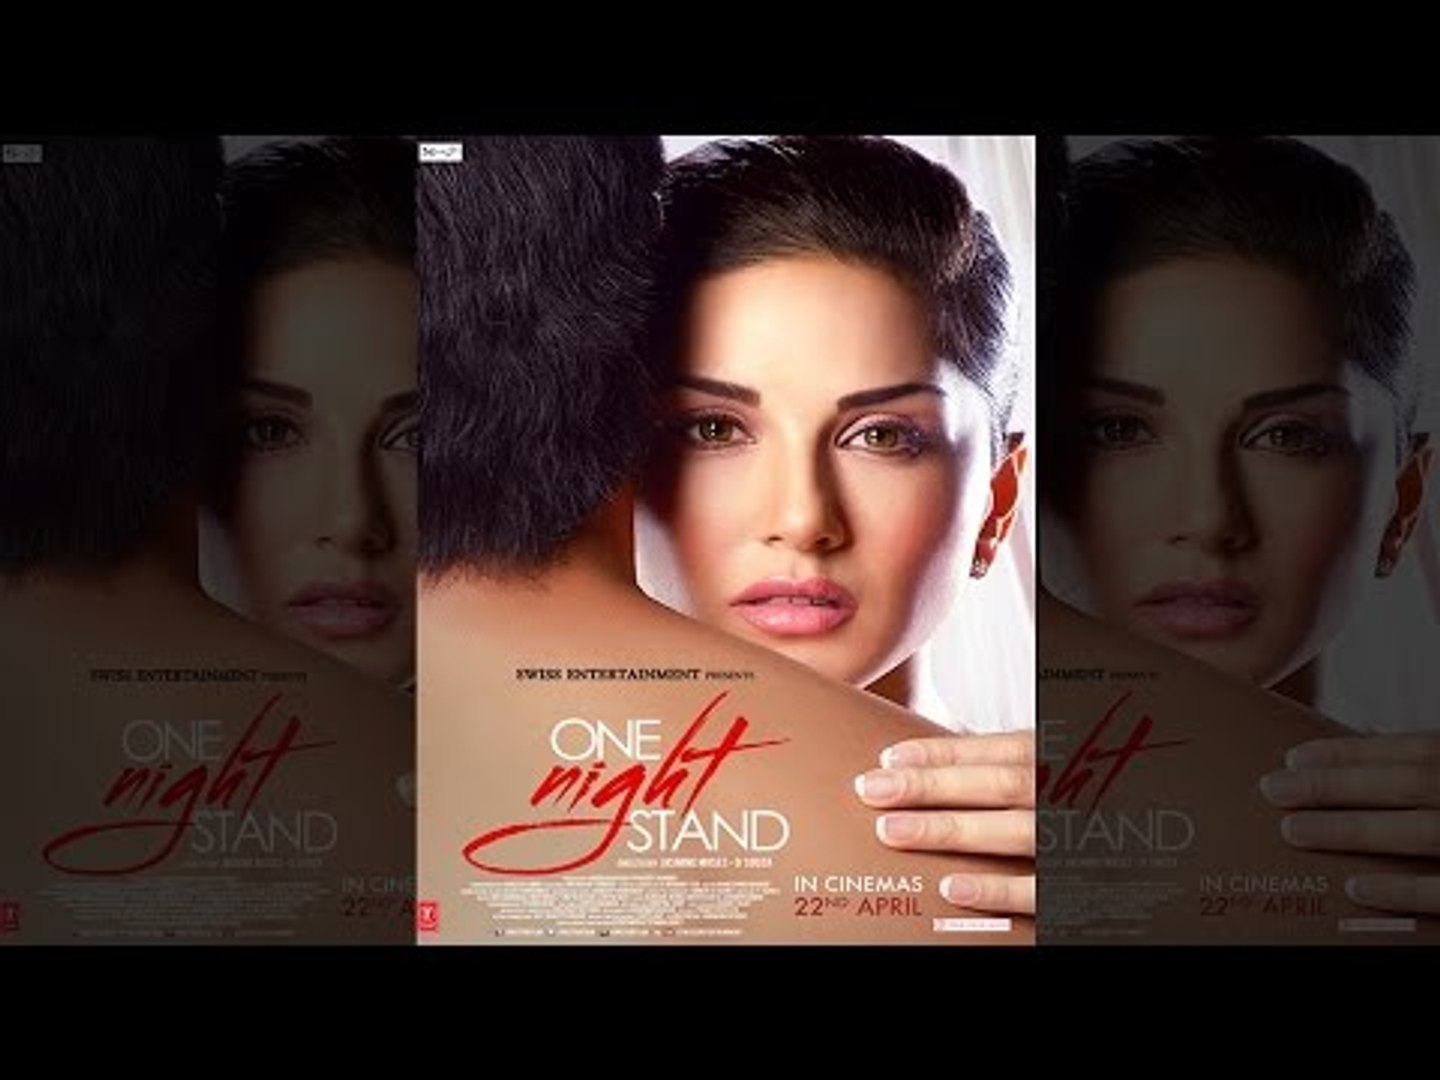 One night stand full movie download